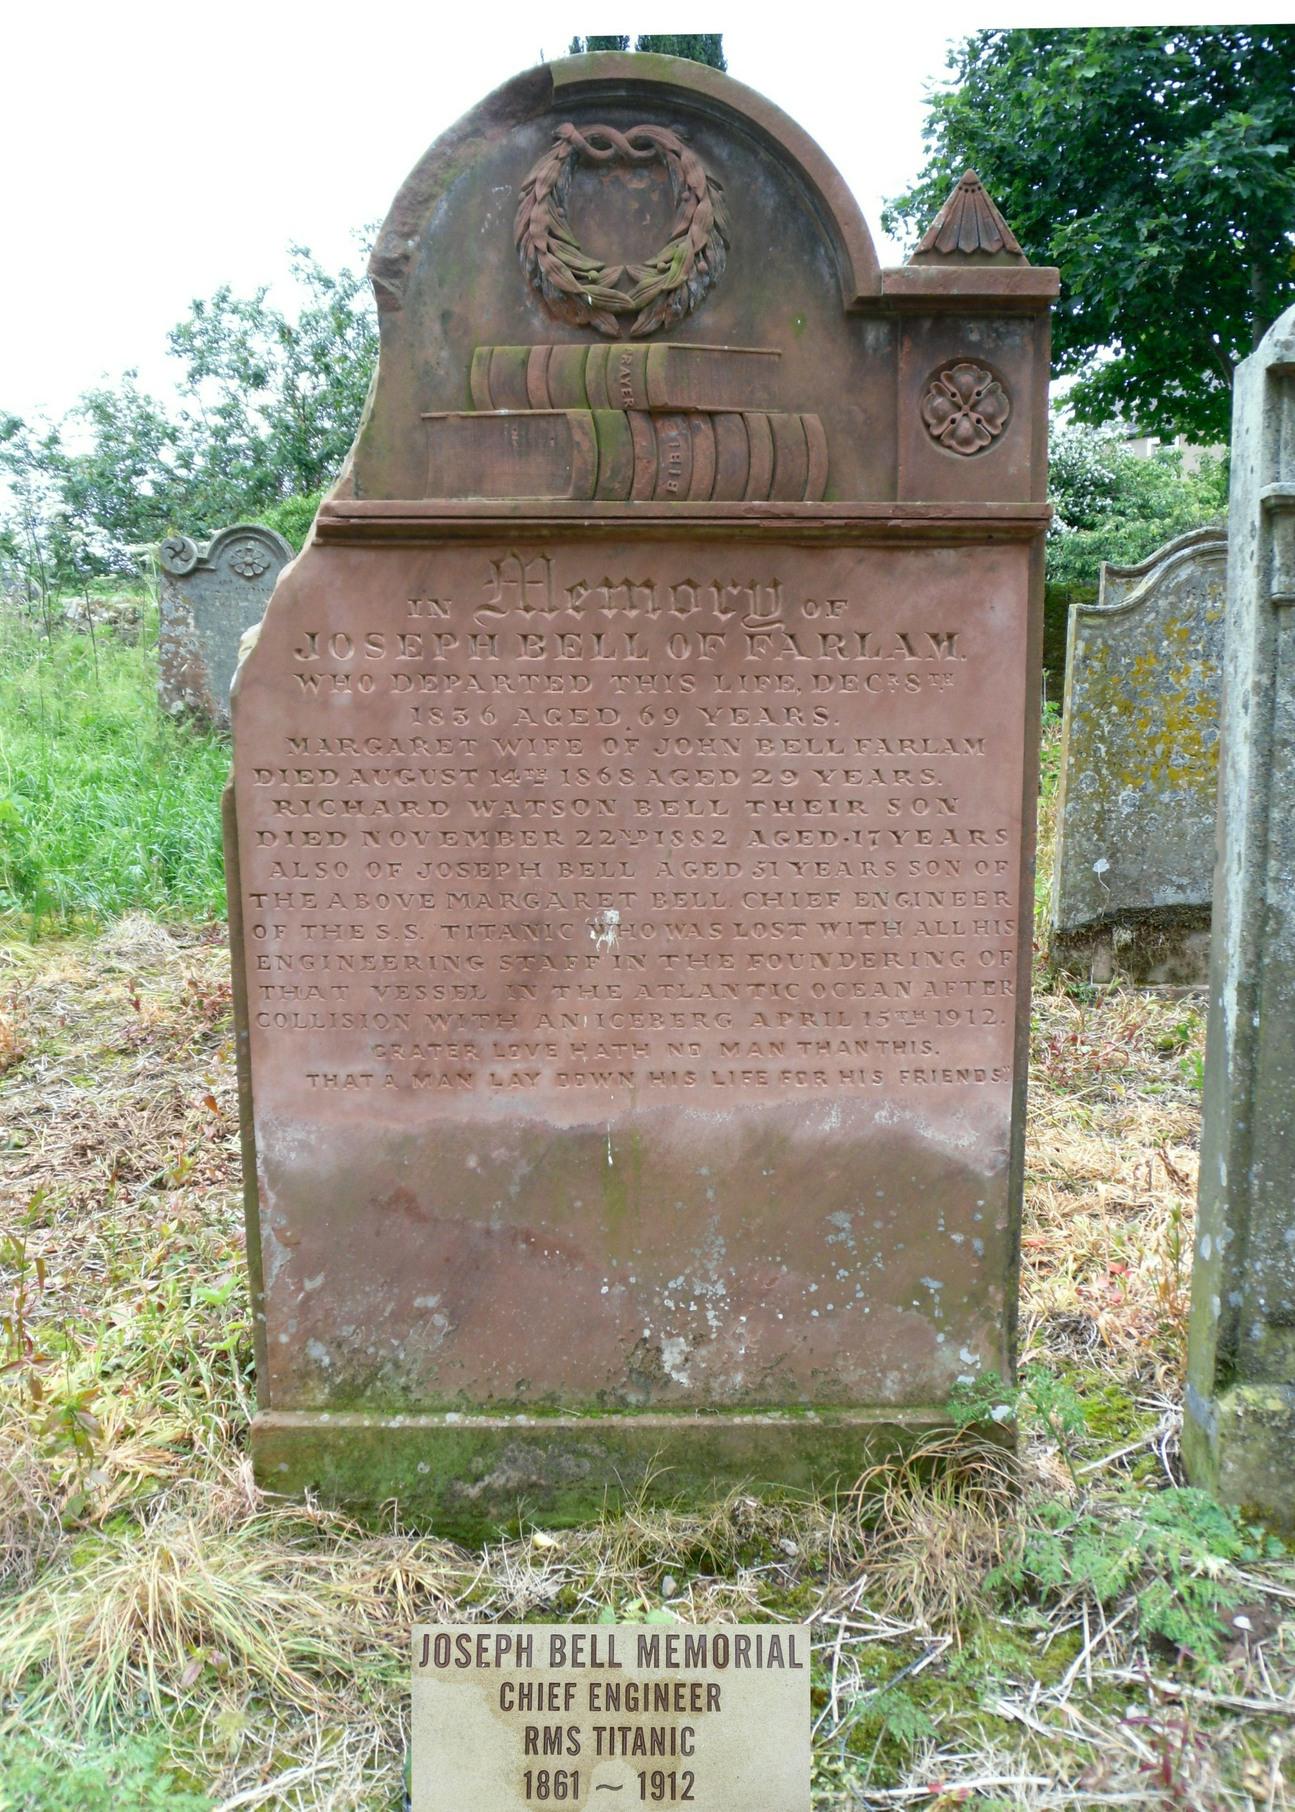 Joseph Bell was the chief engineer on the Titanic and went down with the ship. His family home was in Farlam and his name was add to the Family headstone in the old grave yard at Kirkhouse